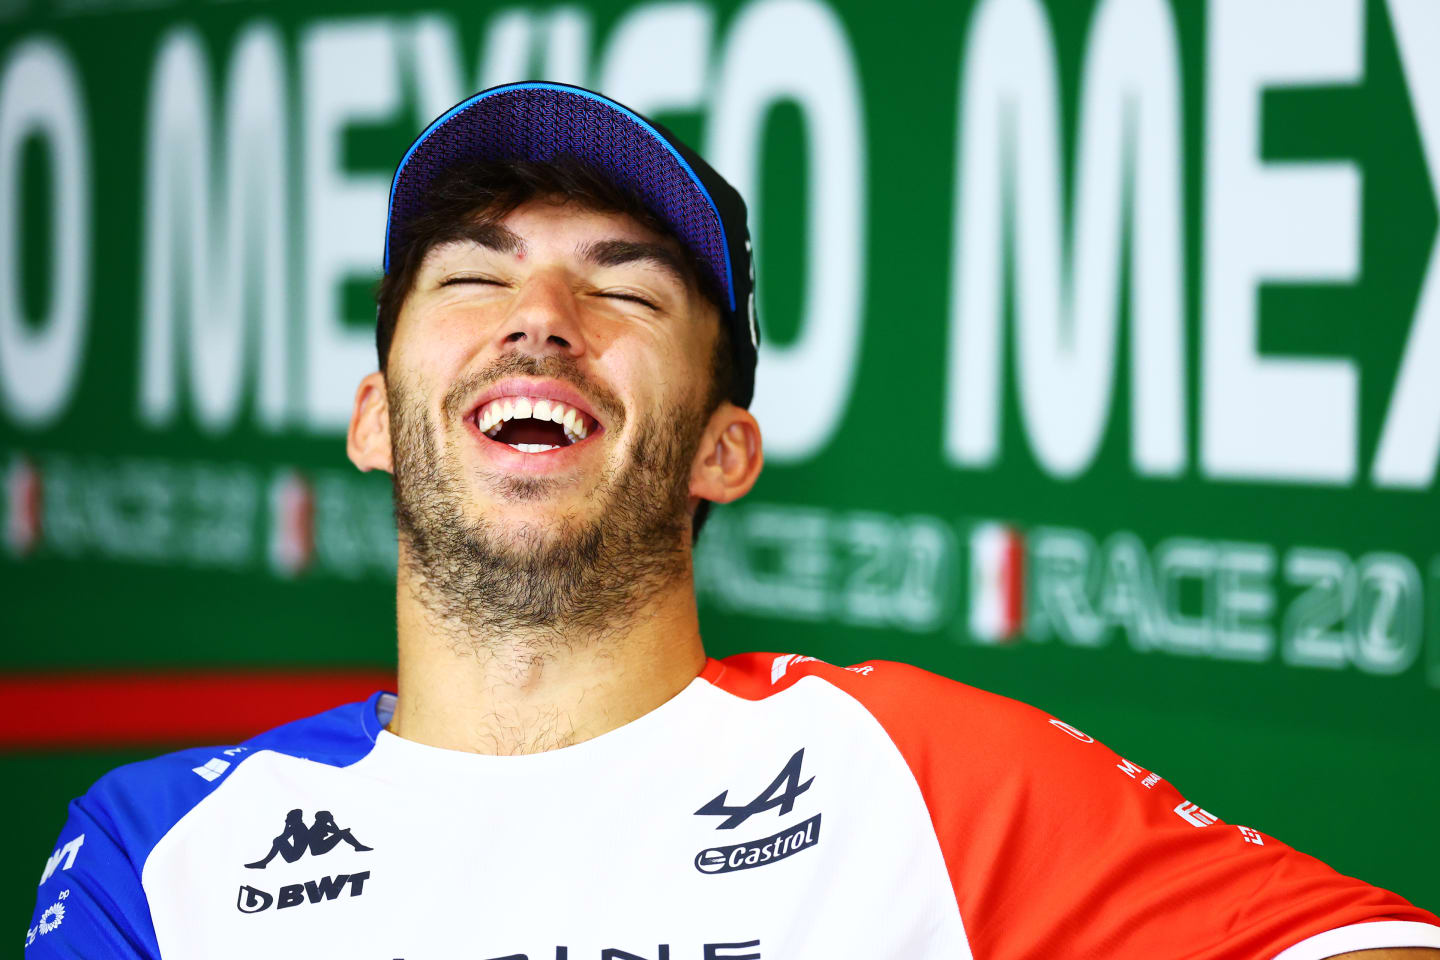 MEXICO CITY, MEXICO - OCTOBER 26: Pierre Gasly of France and Alpine F1 attends the Drivers Press Conference during previews ahead of the F1 Grand Prix of Mexico at Autodromo Hermanos Rodriguez on October 26, 2023 in Mexico City, Mexico. (Photo by Dan Istitene/Getty Images)